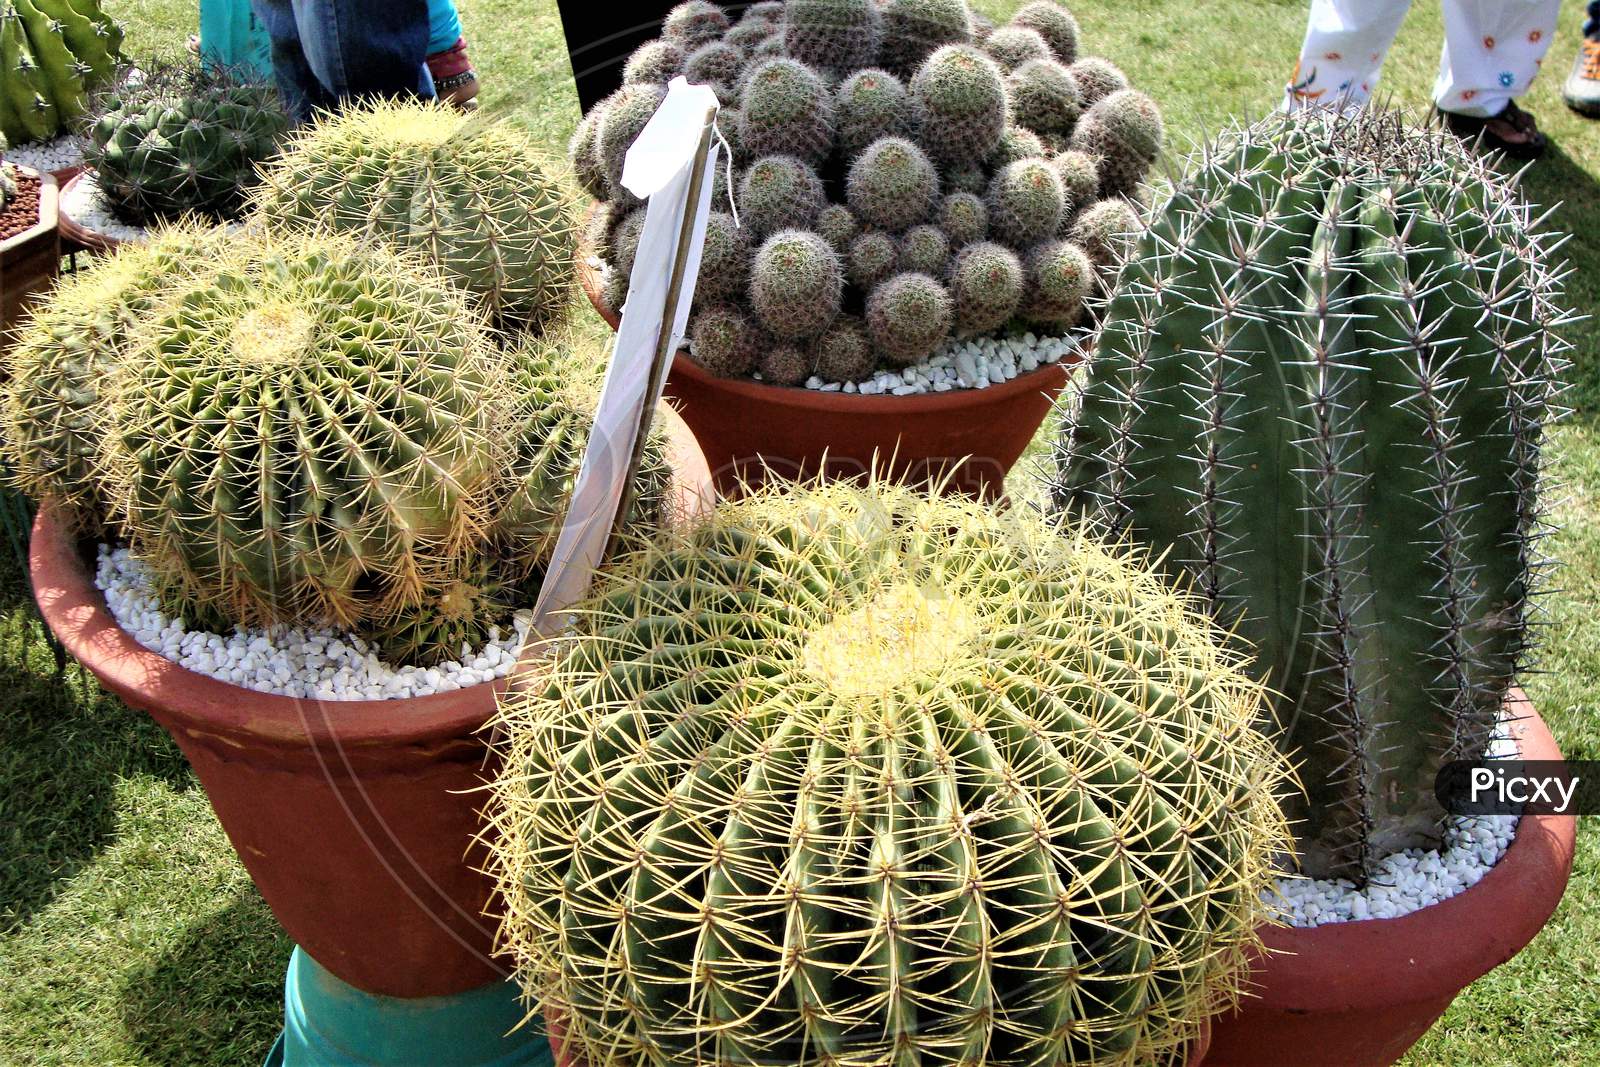 Group of amazing spherical and cylindrical cactus on display at flower show, India